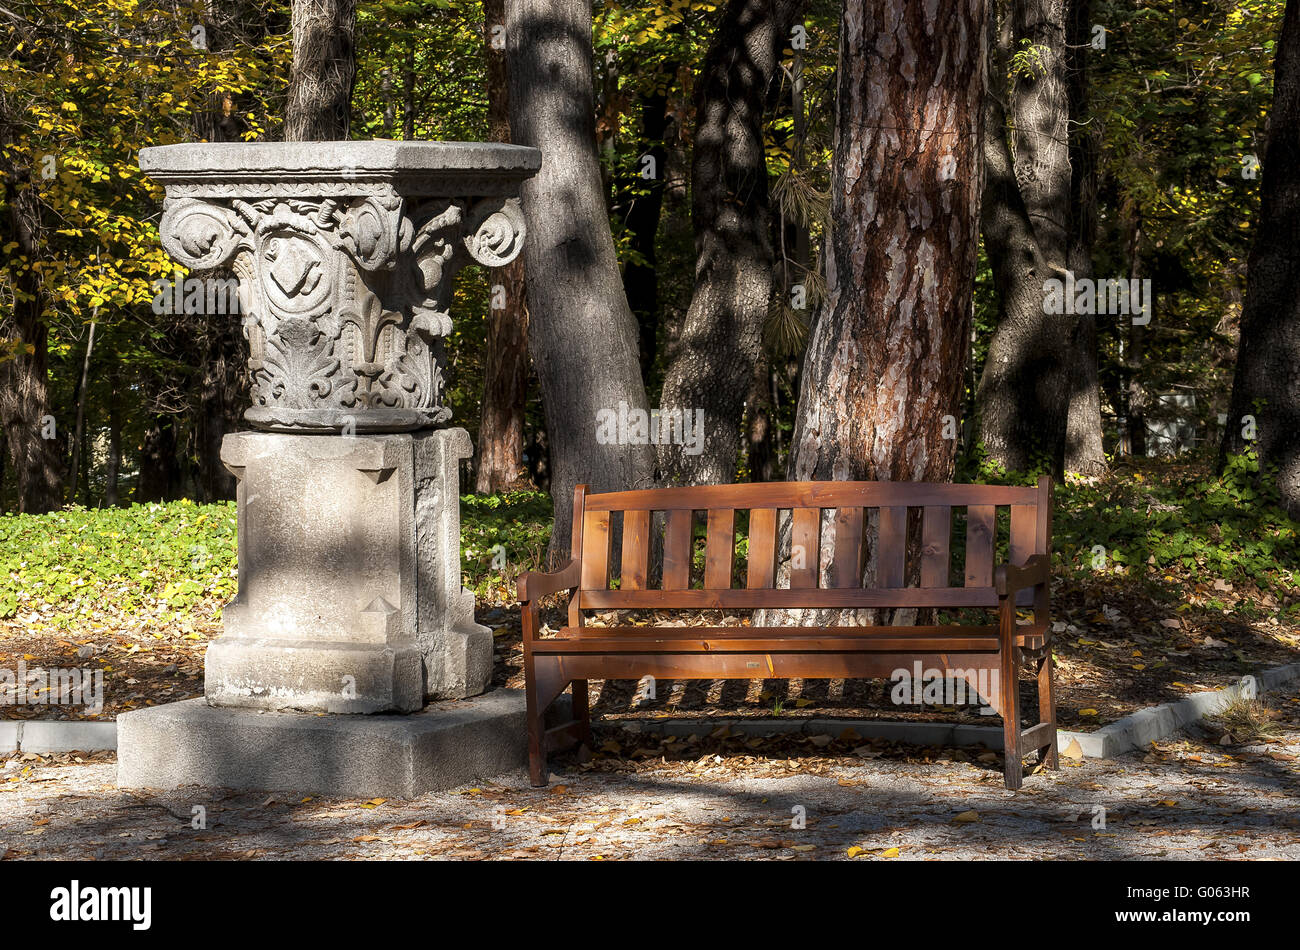 Wooden bench and stone capital in park Stock Photo